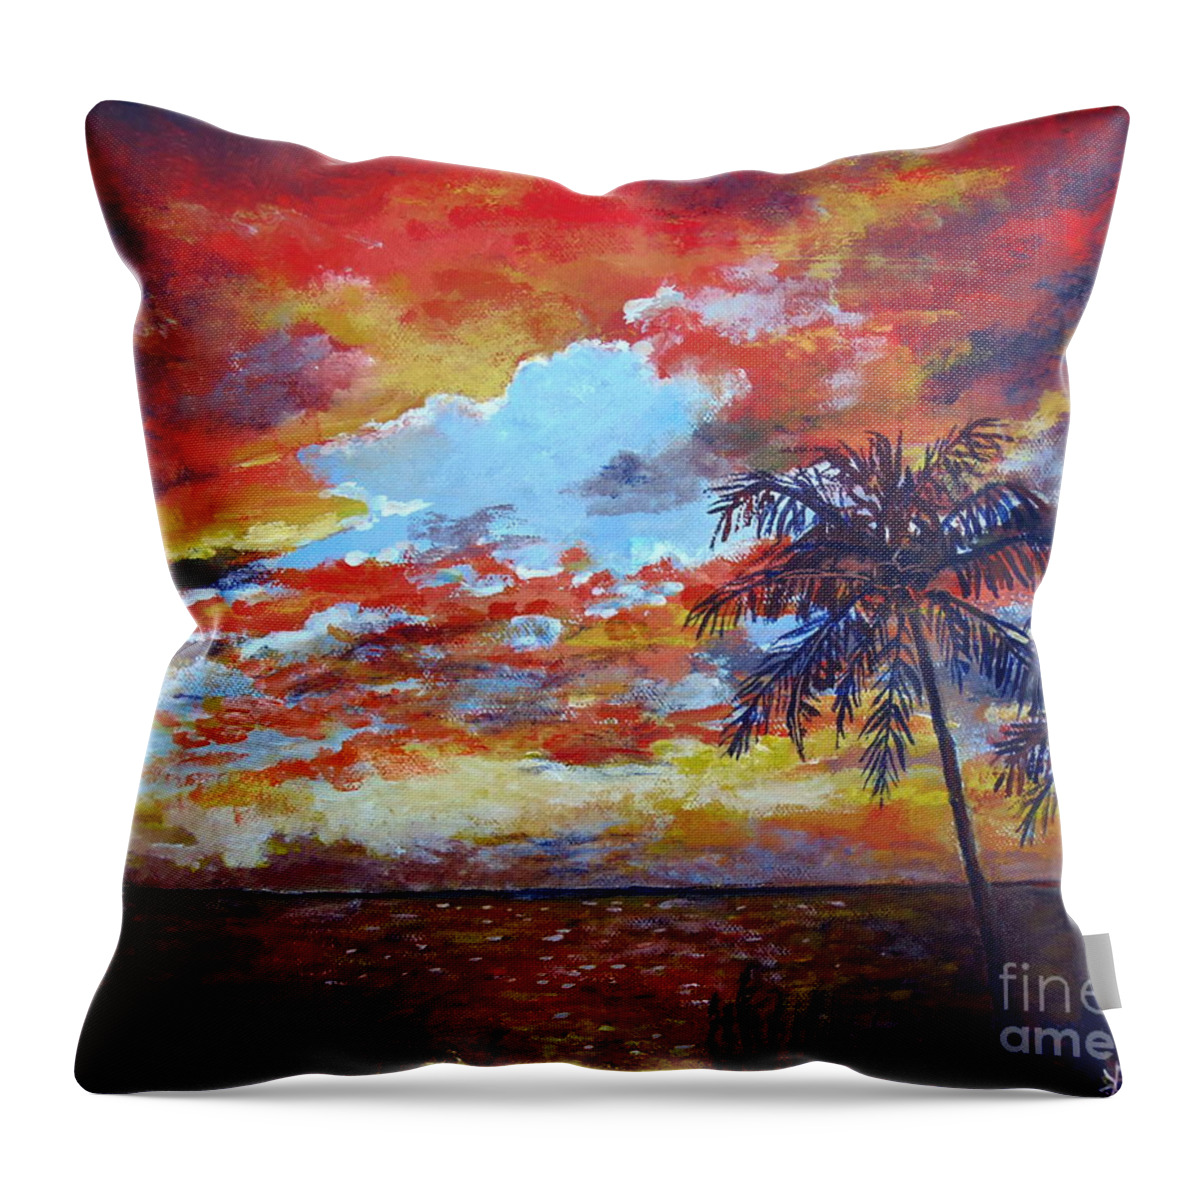 Pine Island Throw Pillow featuring the painting Pine Island Sunset by Lou Ann Bagnall